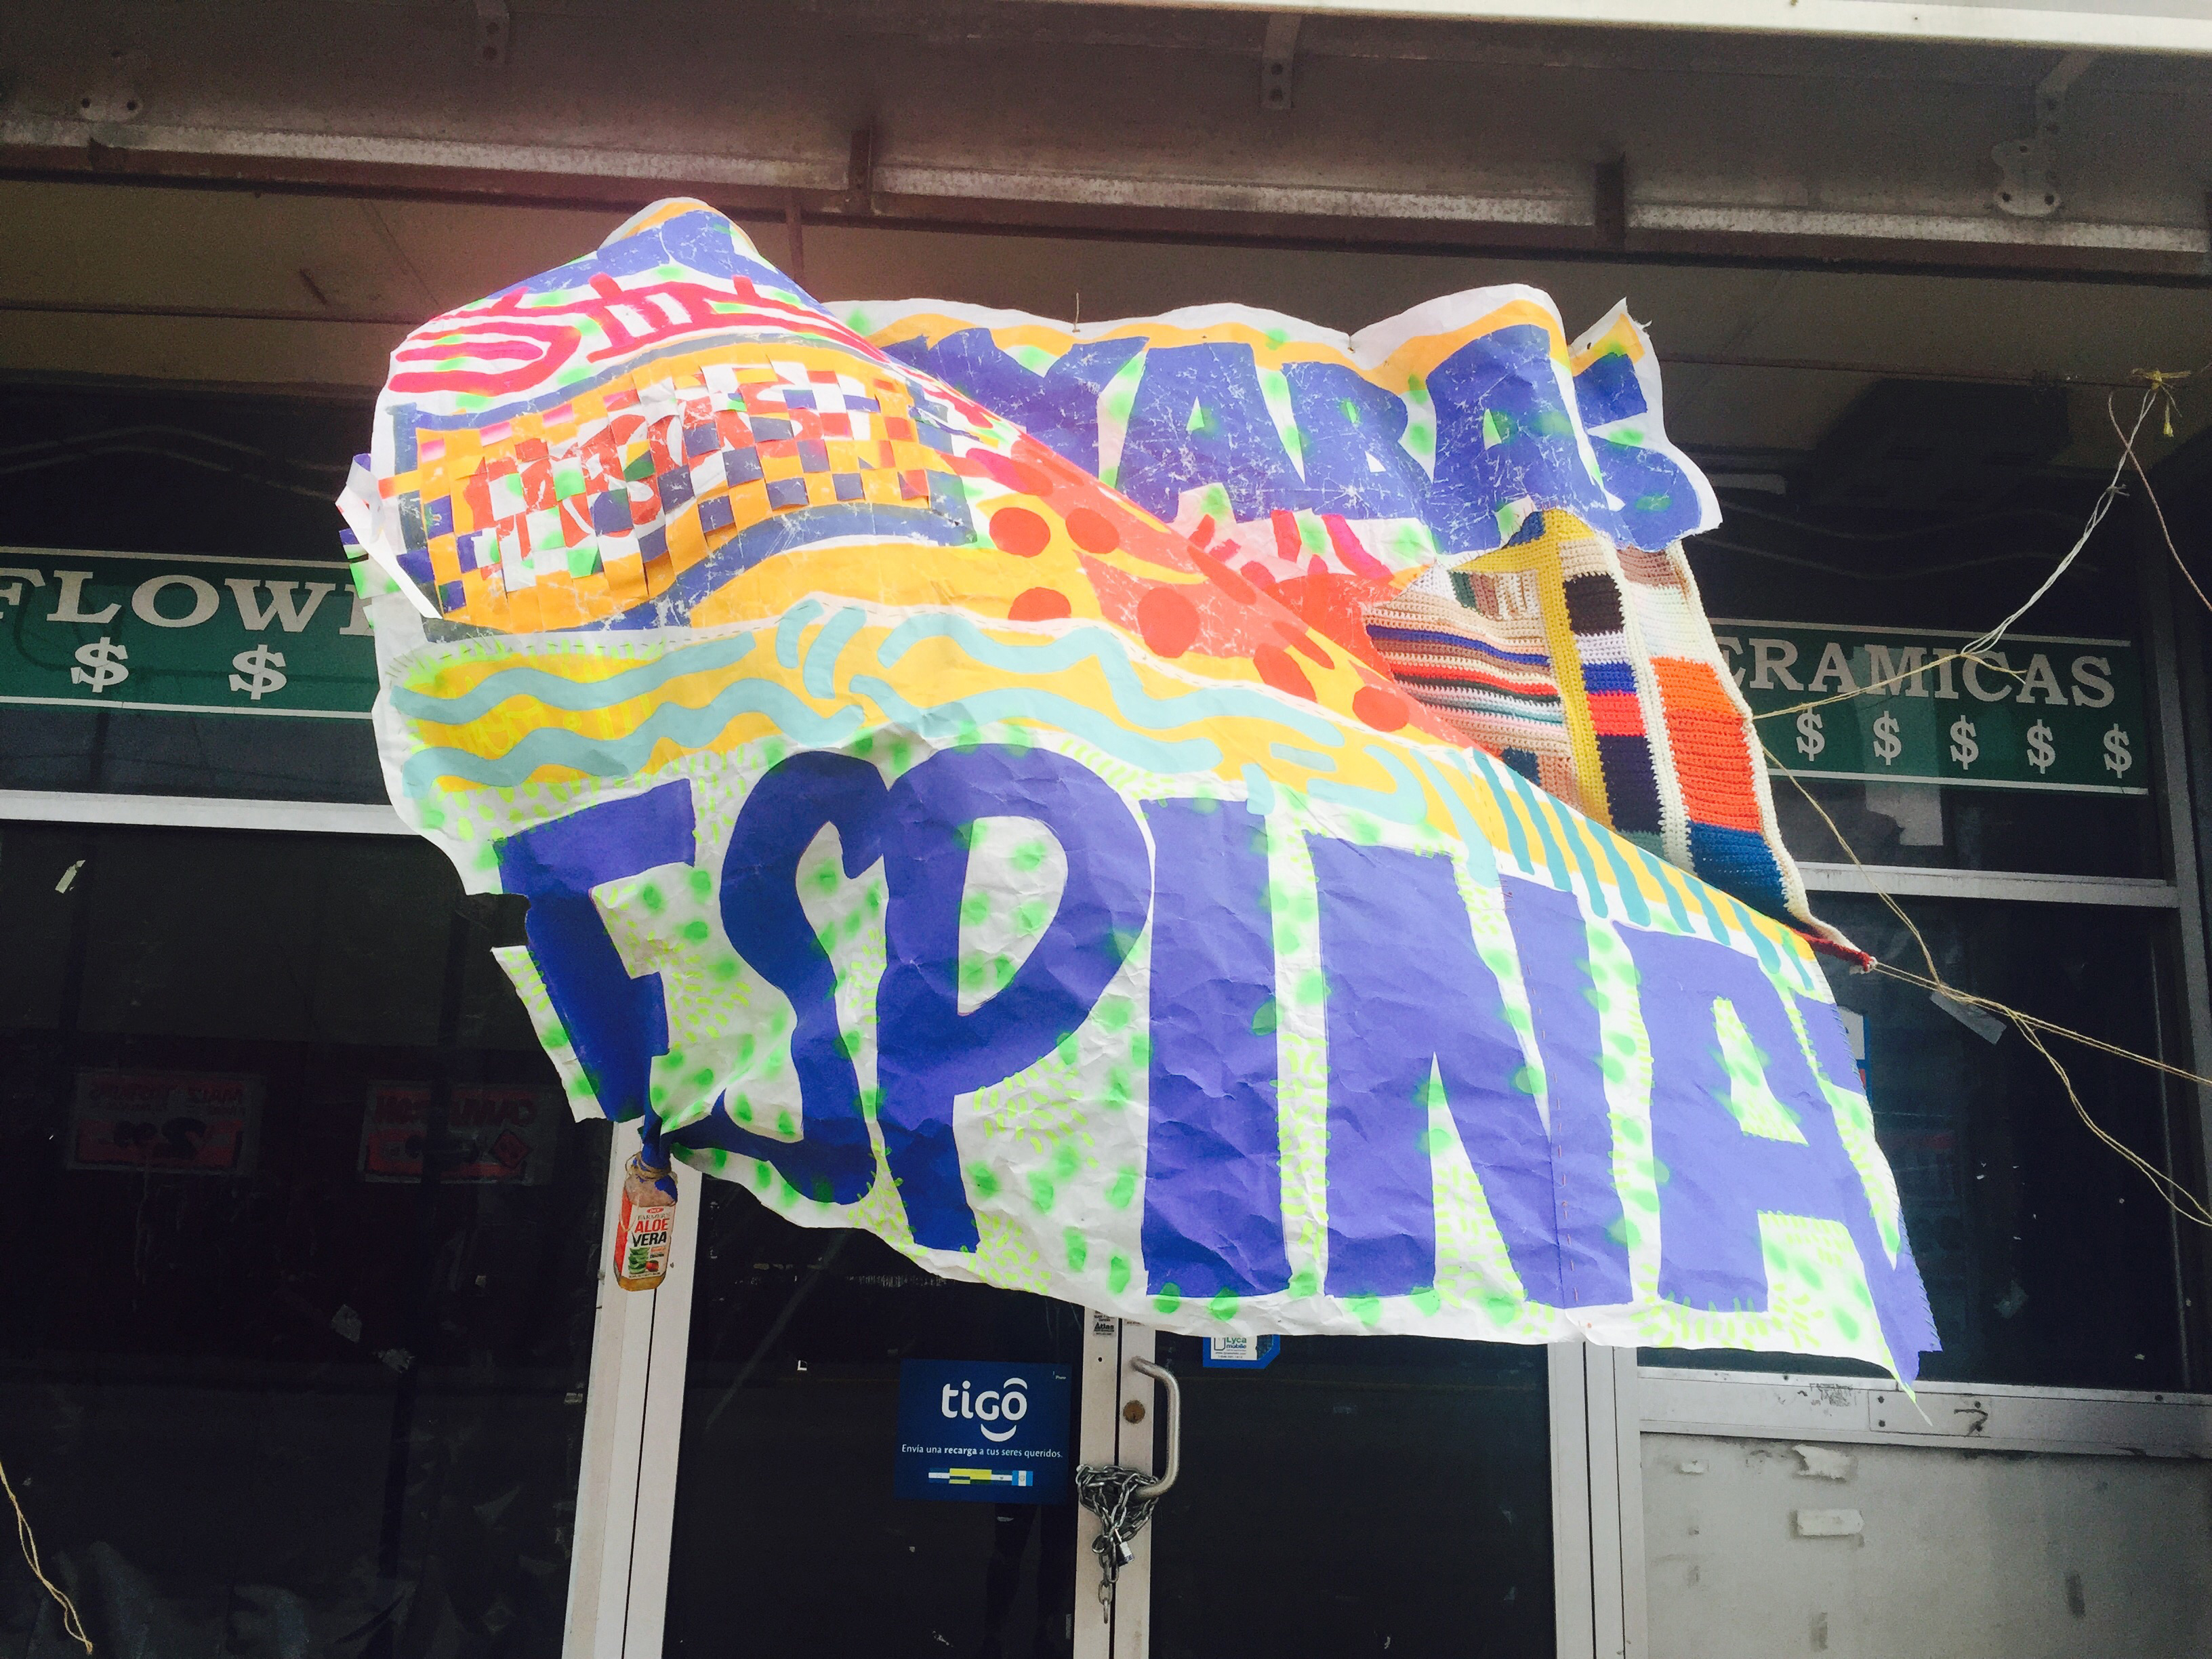 “Guayaba spine memory blanket,” 2017. Collaged and woven hand-made grocery signs stitched together and painted over with colorful patterns in select areas. A knitted textile of colorful stripes and bands is stitched on the right side. The work is installed outside of a storefront in Pilsen. 